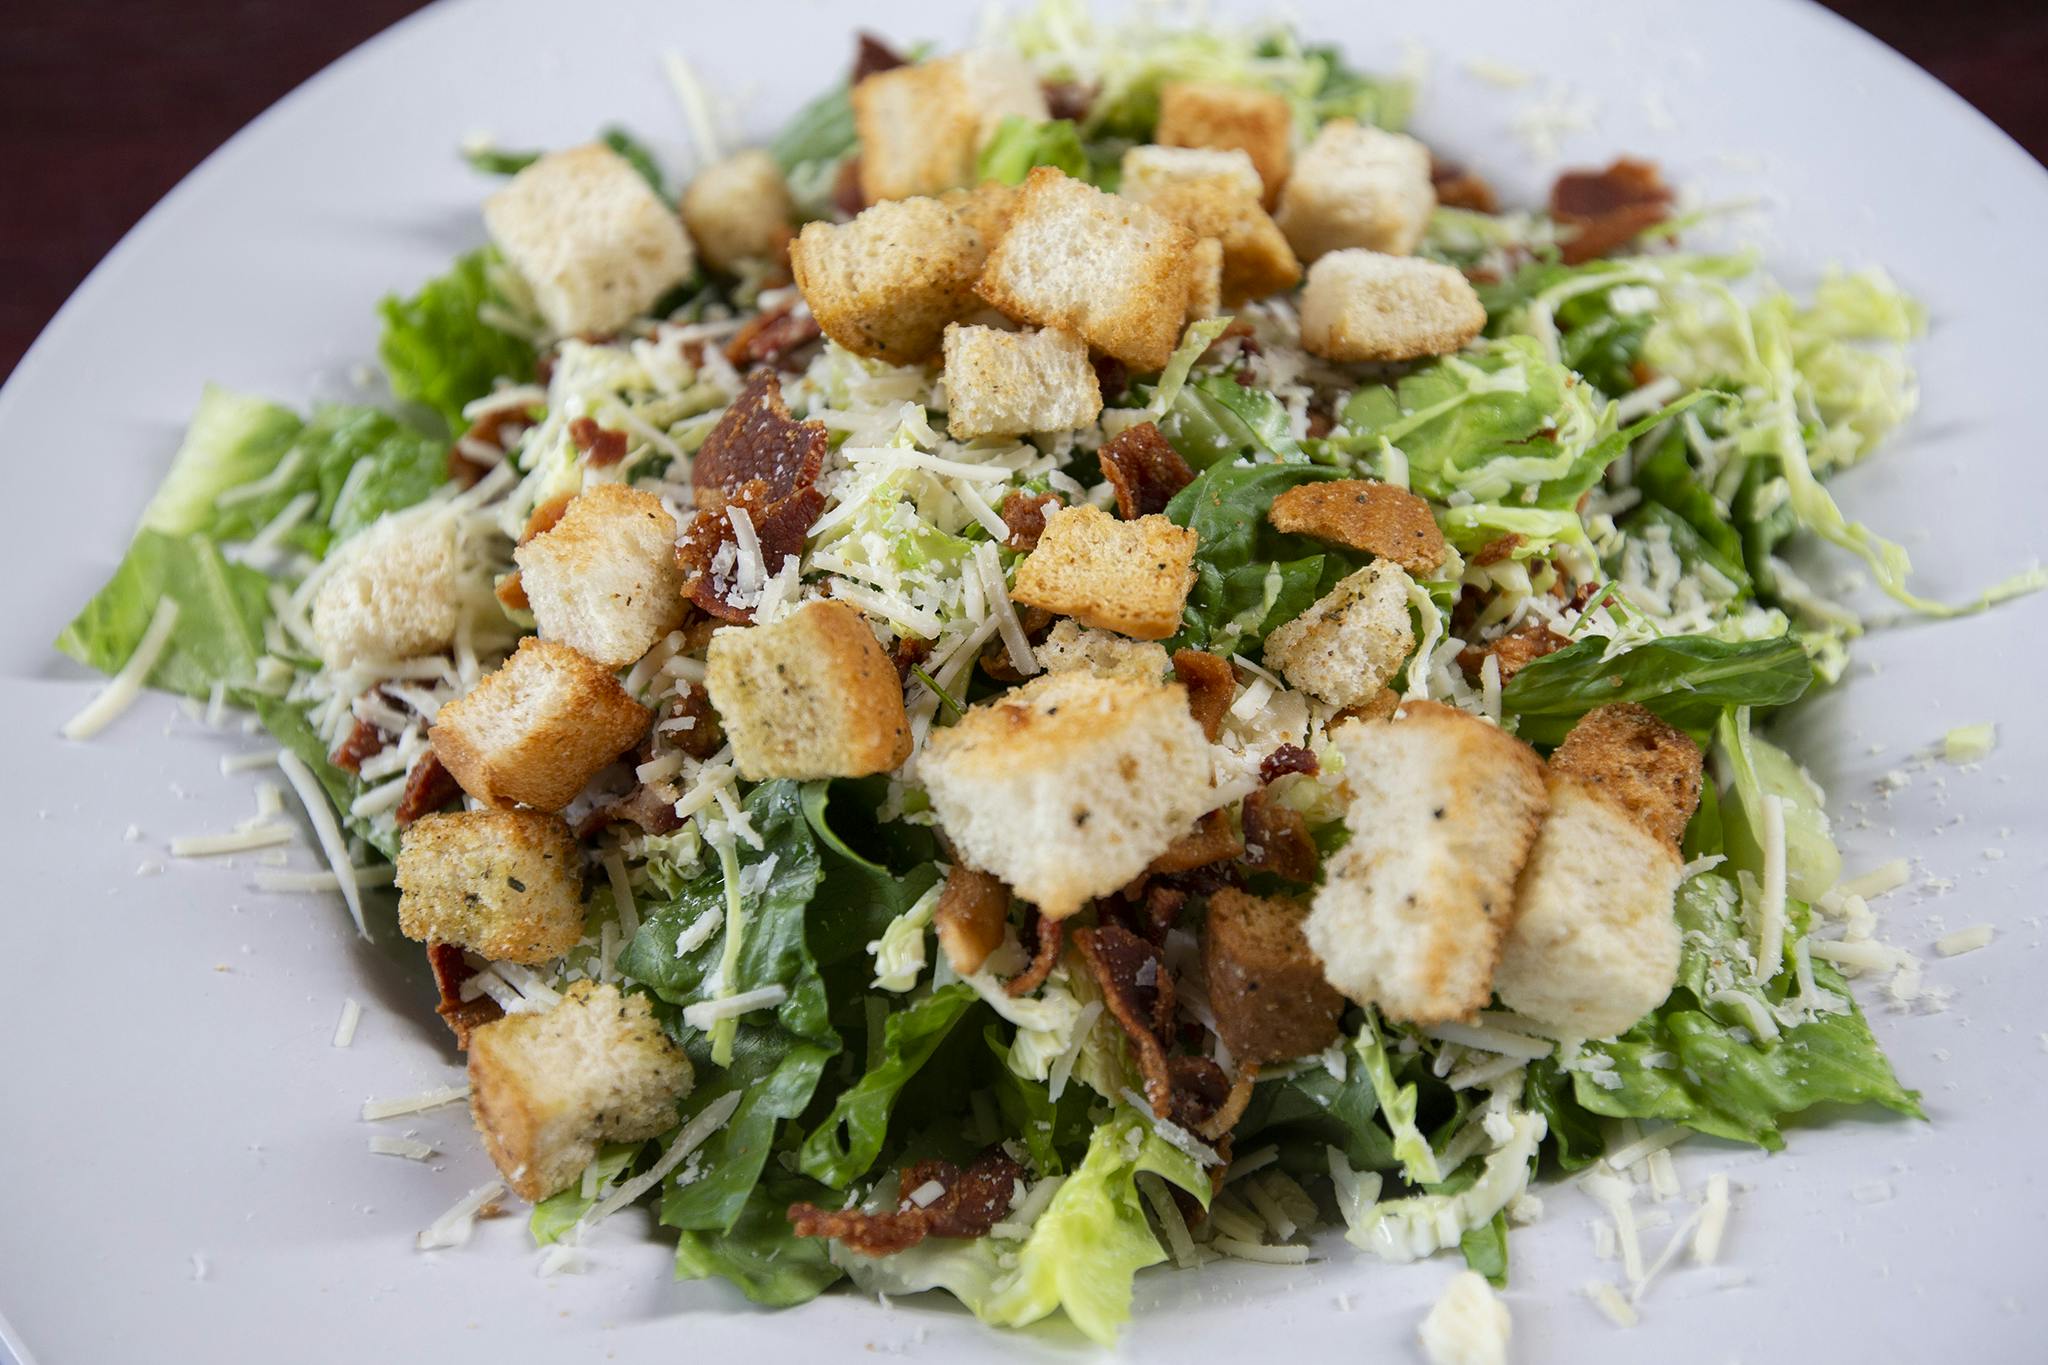 Firehouse Caesar Salad from Firehouse Grill - Chicago Ave in Evanston, IL